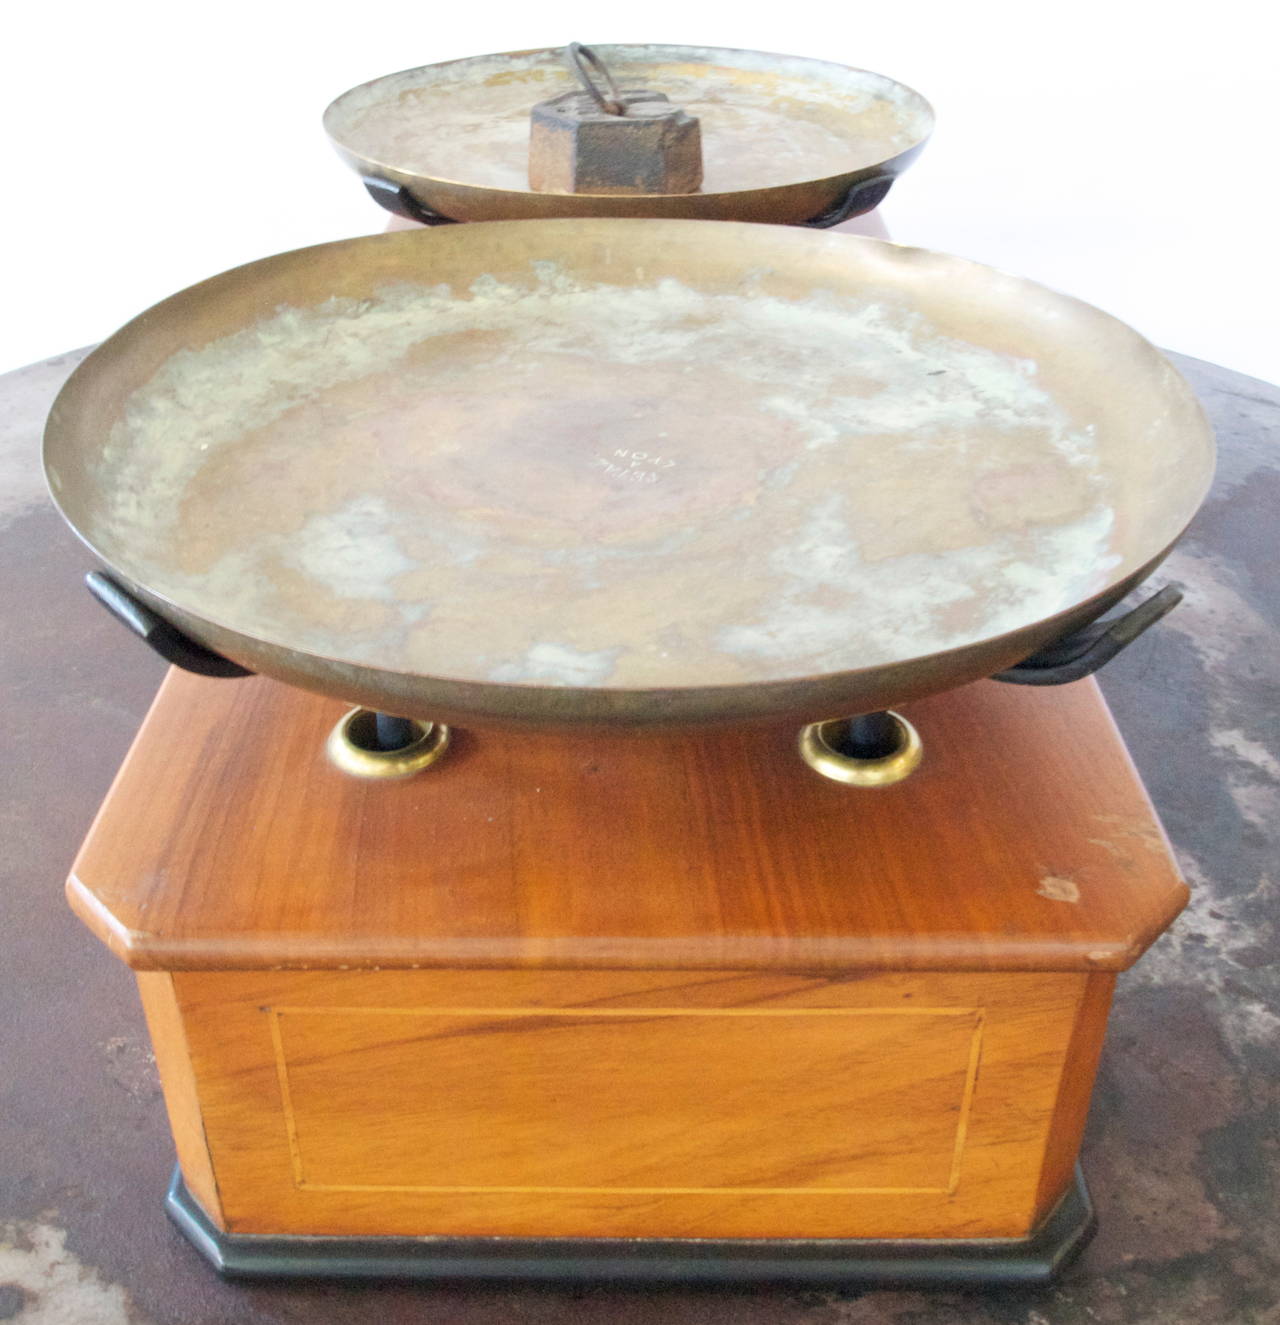 Inlaid mahogany and brass on ebonized wood base French butcher scale with removable brass trays and 1 Kilo weight from the late 19th C. marked Tetaz A Lyon